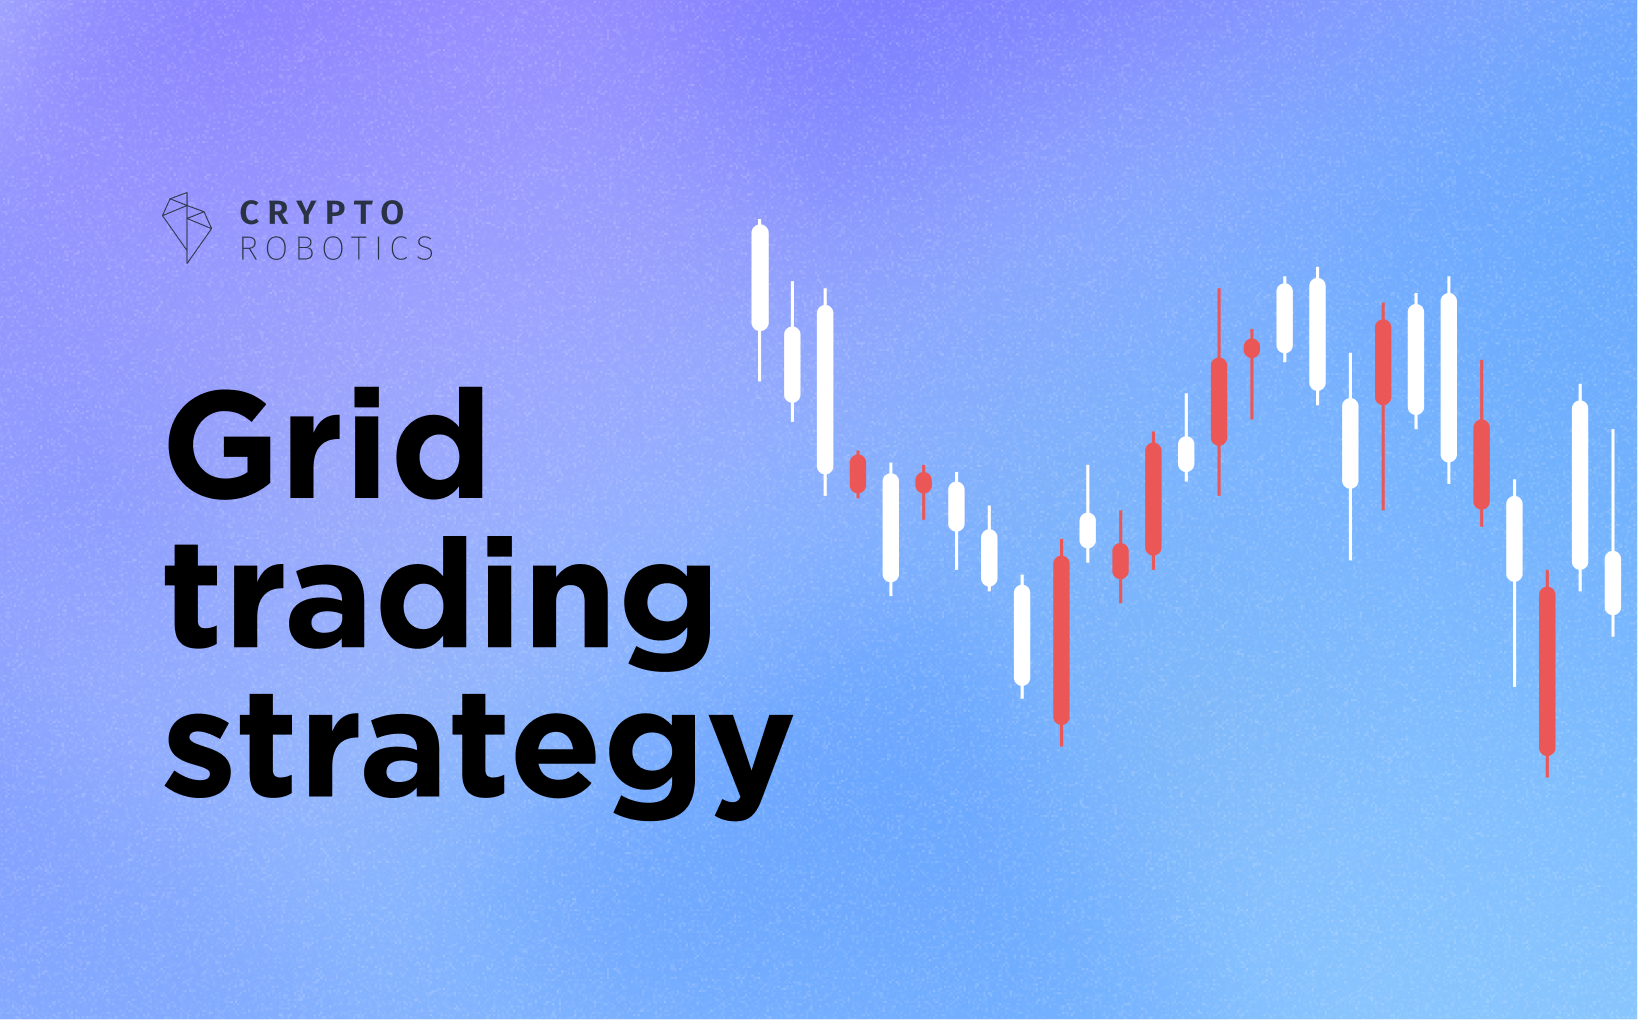 Grid trading strategy